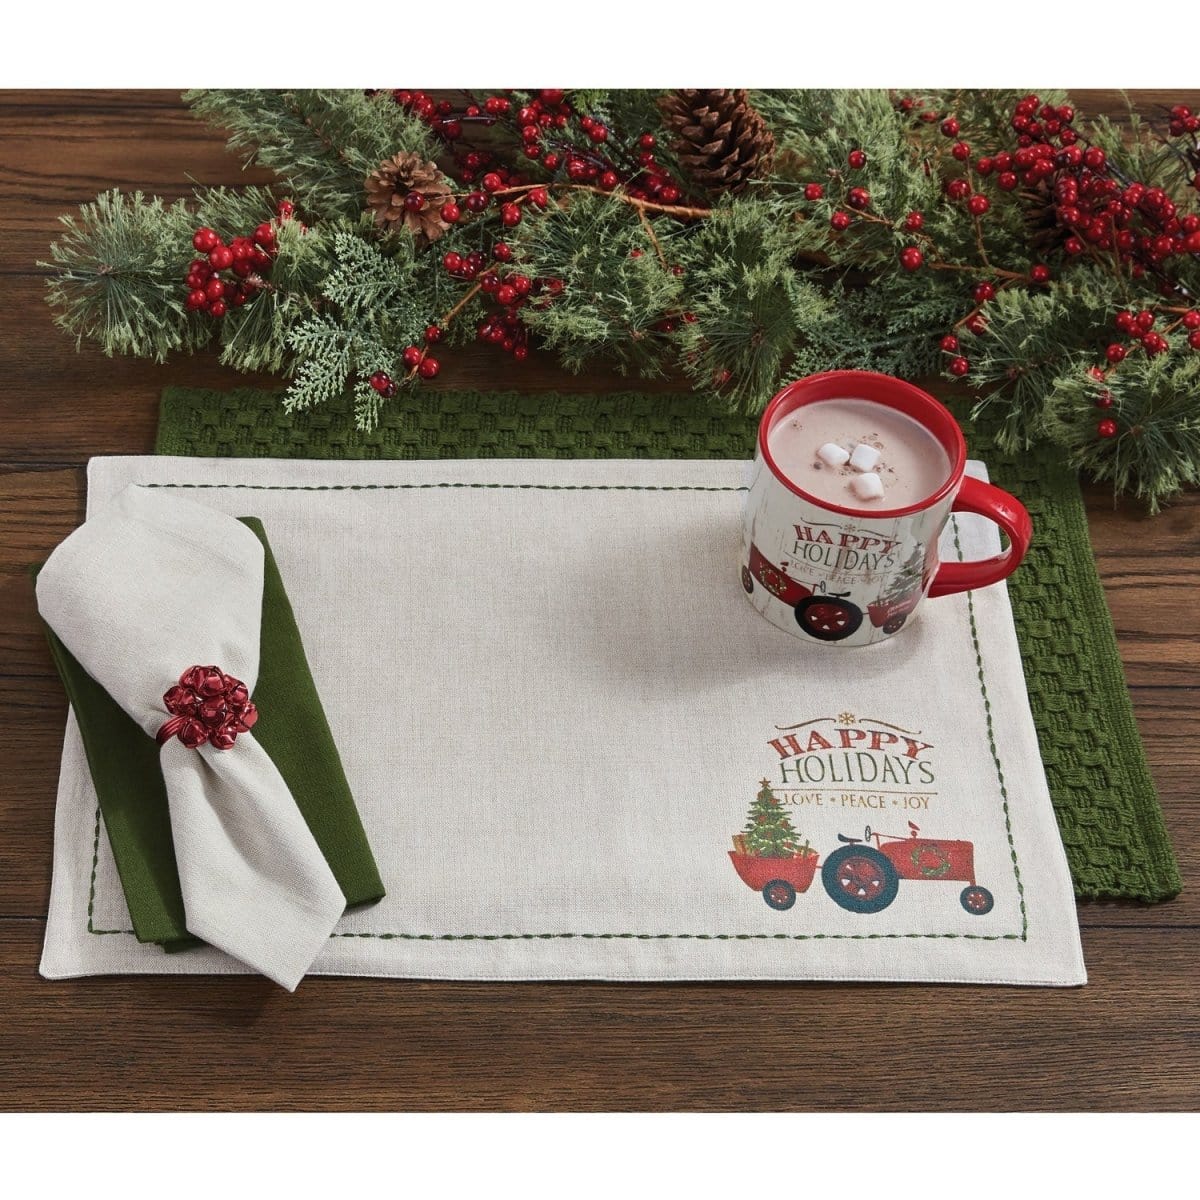 Over the River Printed Tractor Placemat-Park Designs-The Village Merchant